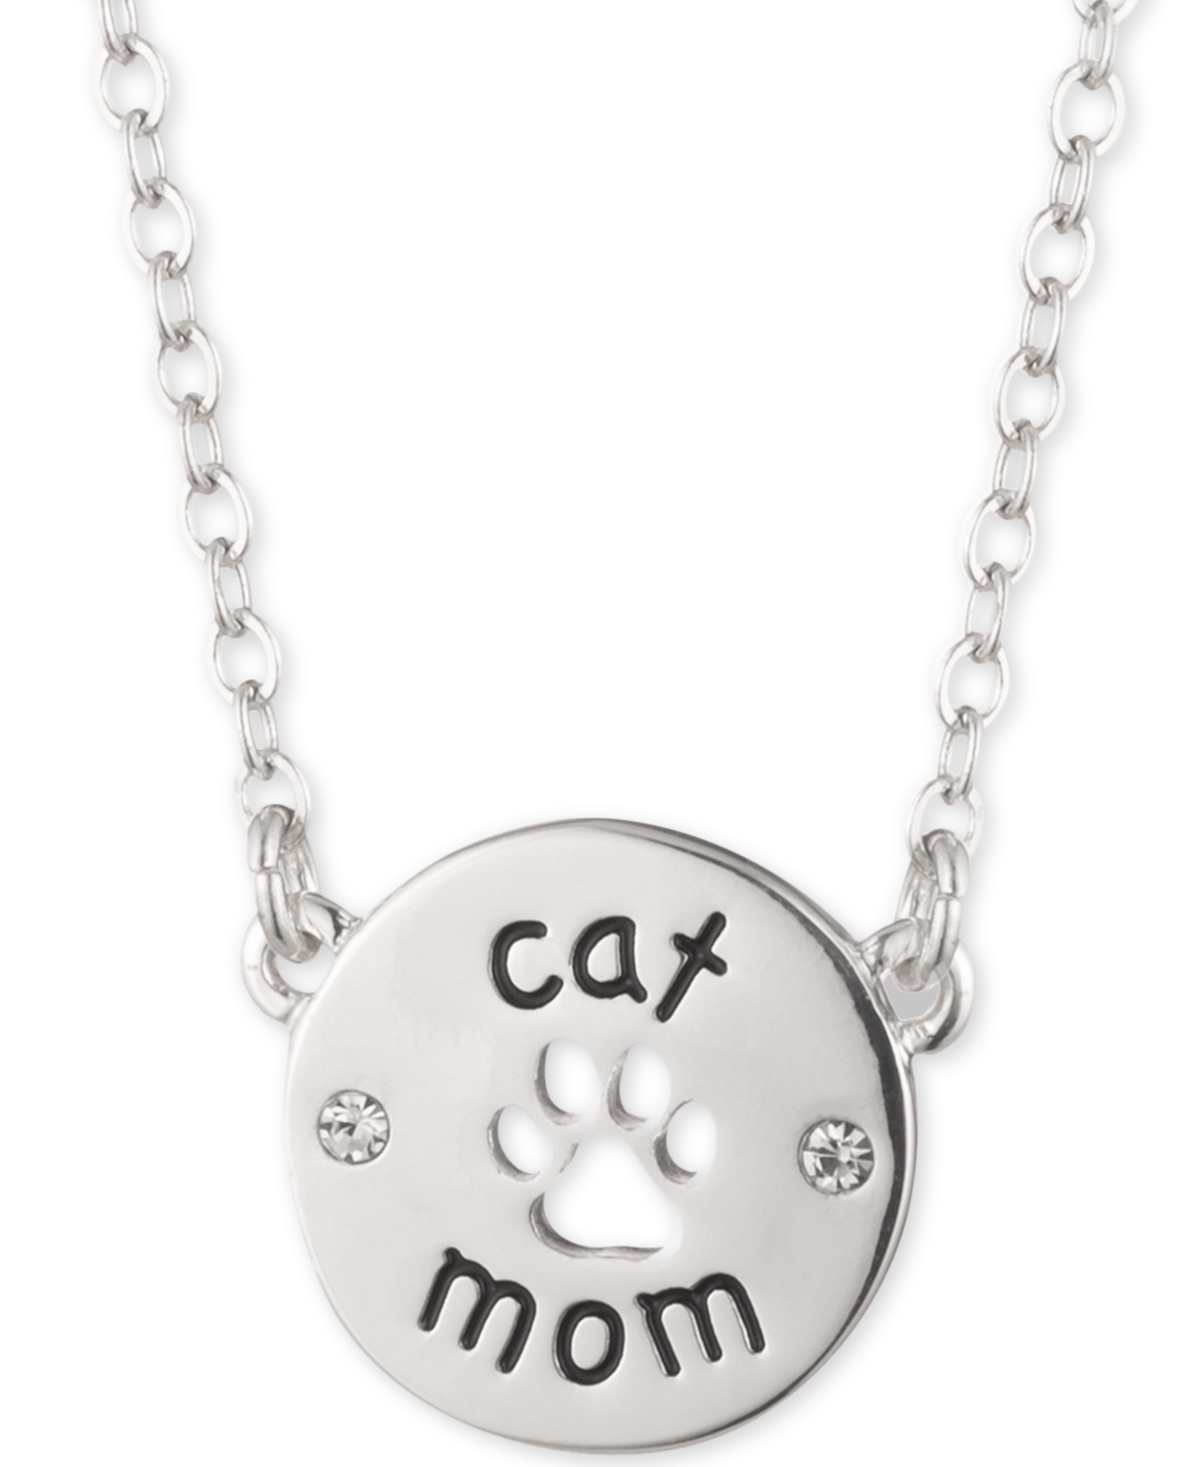 Silver-Tone Cat Mom Pendant Necklace, 16" + 3" extender - Silver